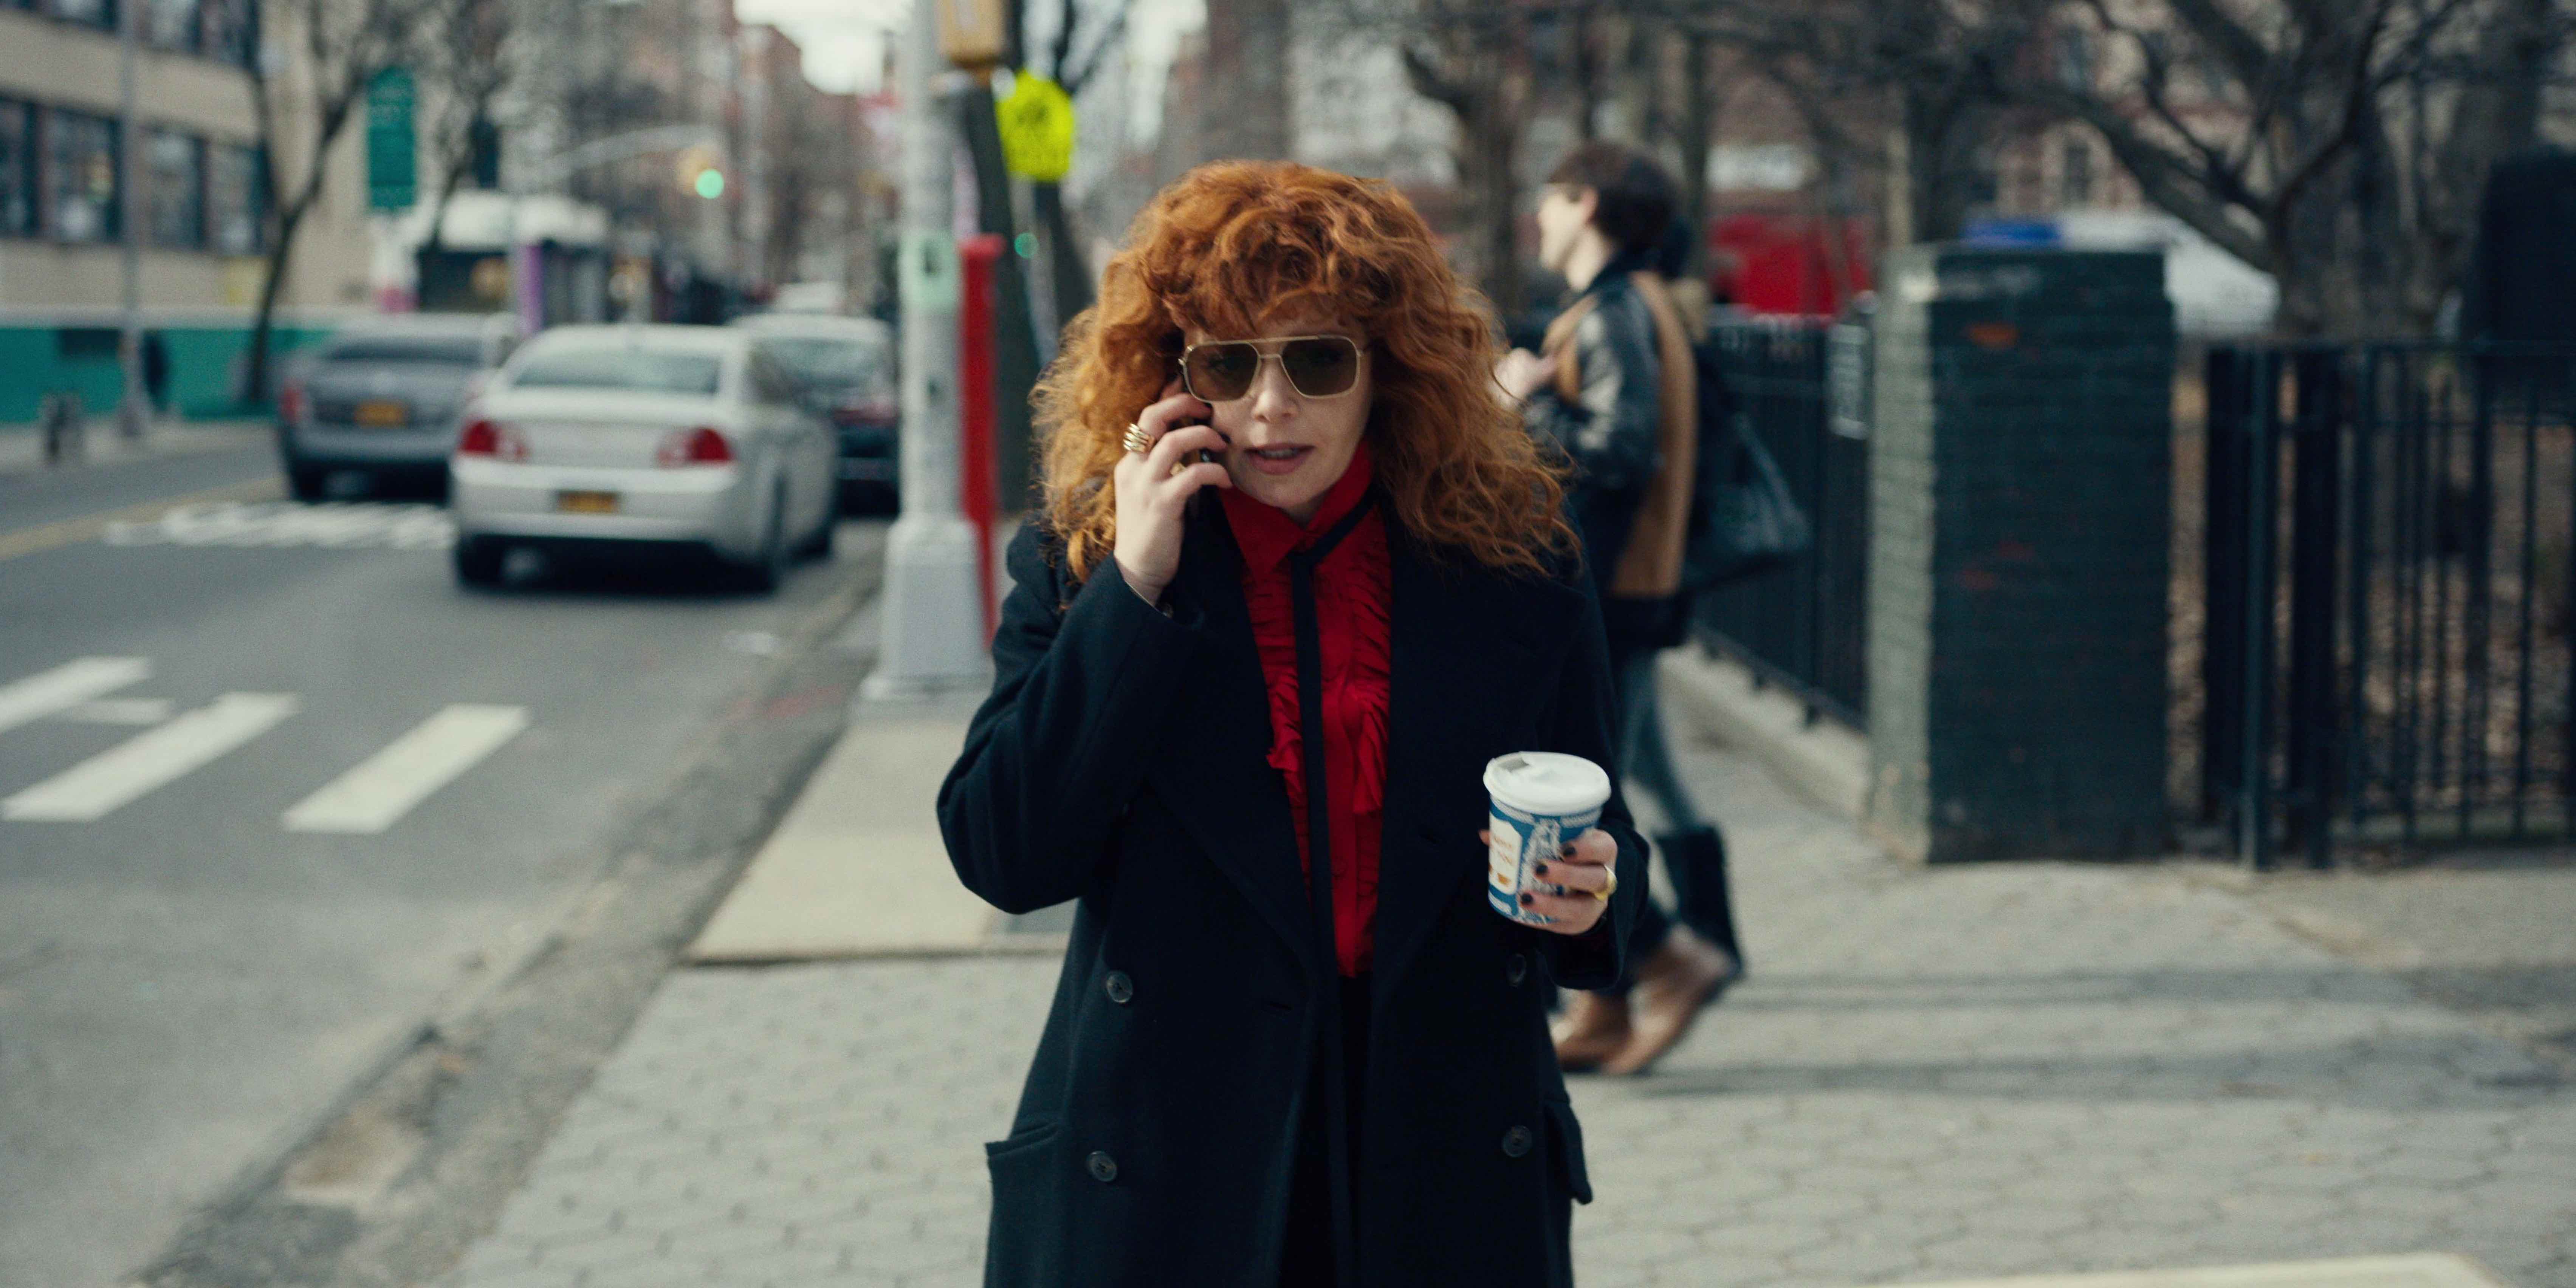 Russian Doll Soundtrack on Netflix - Every Song in Season 1, Episode 1